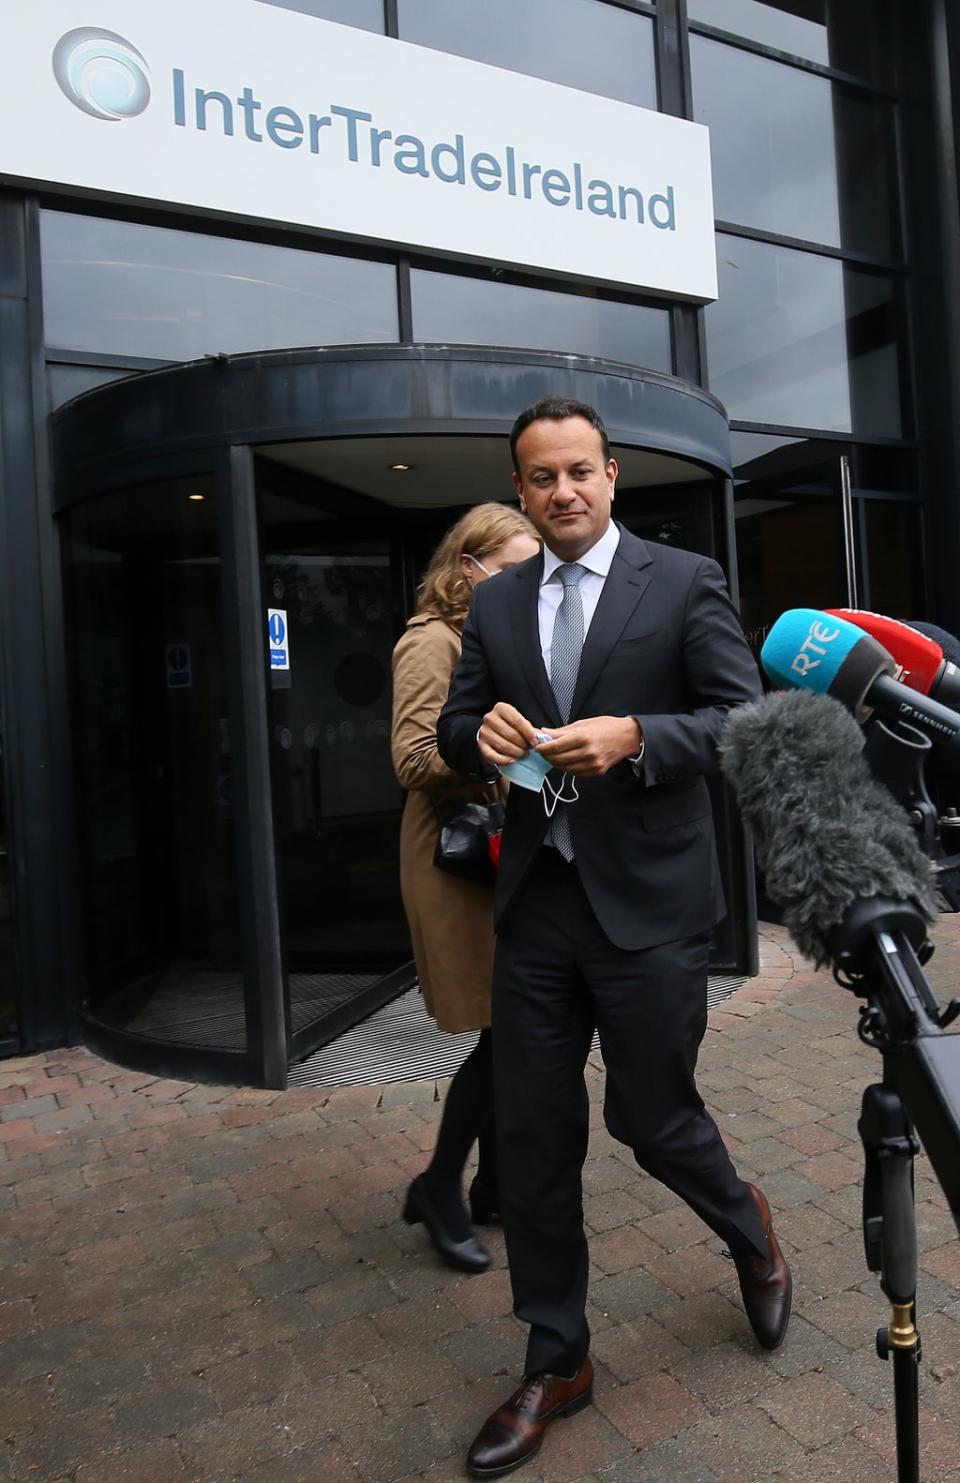 Tanaiste Leo Varadkar during a visit to InterTradeIreland’s offices in Newry (Brian Lawless/PA) (PA Wire)